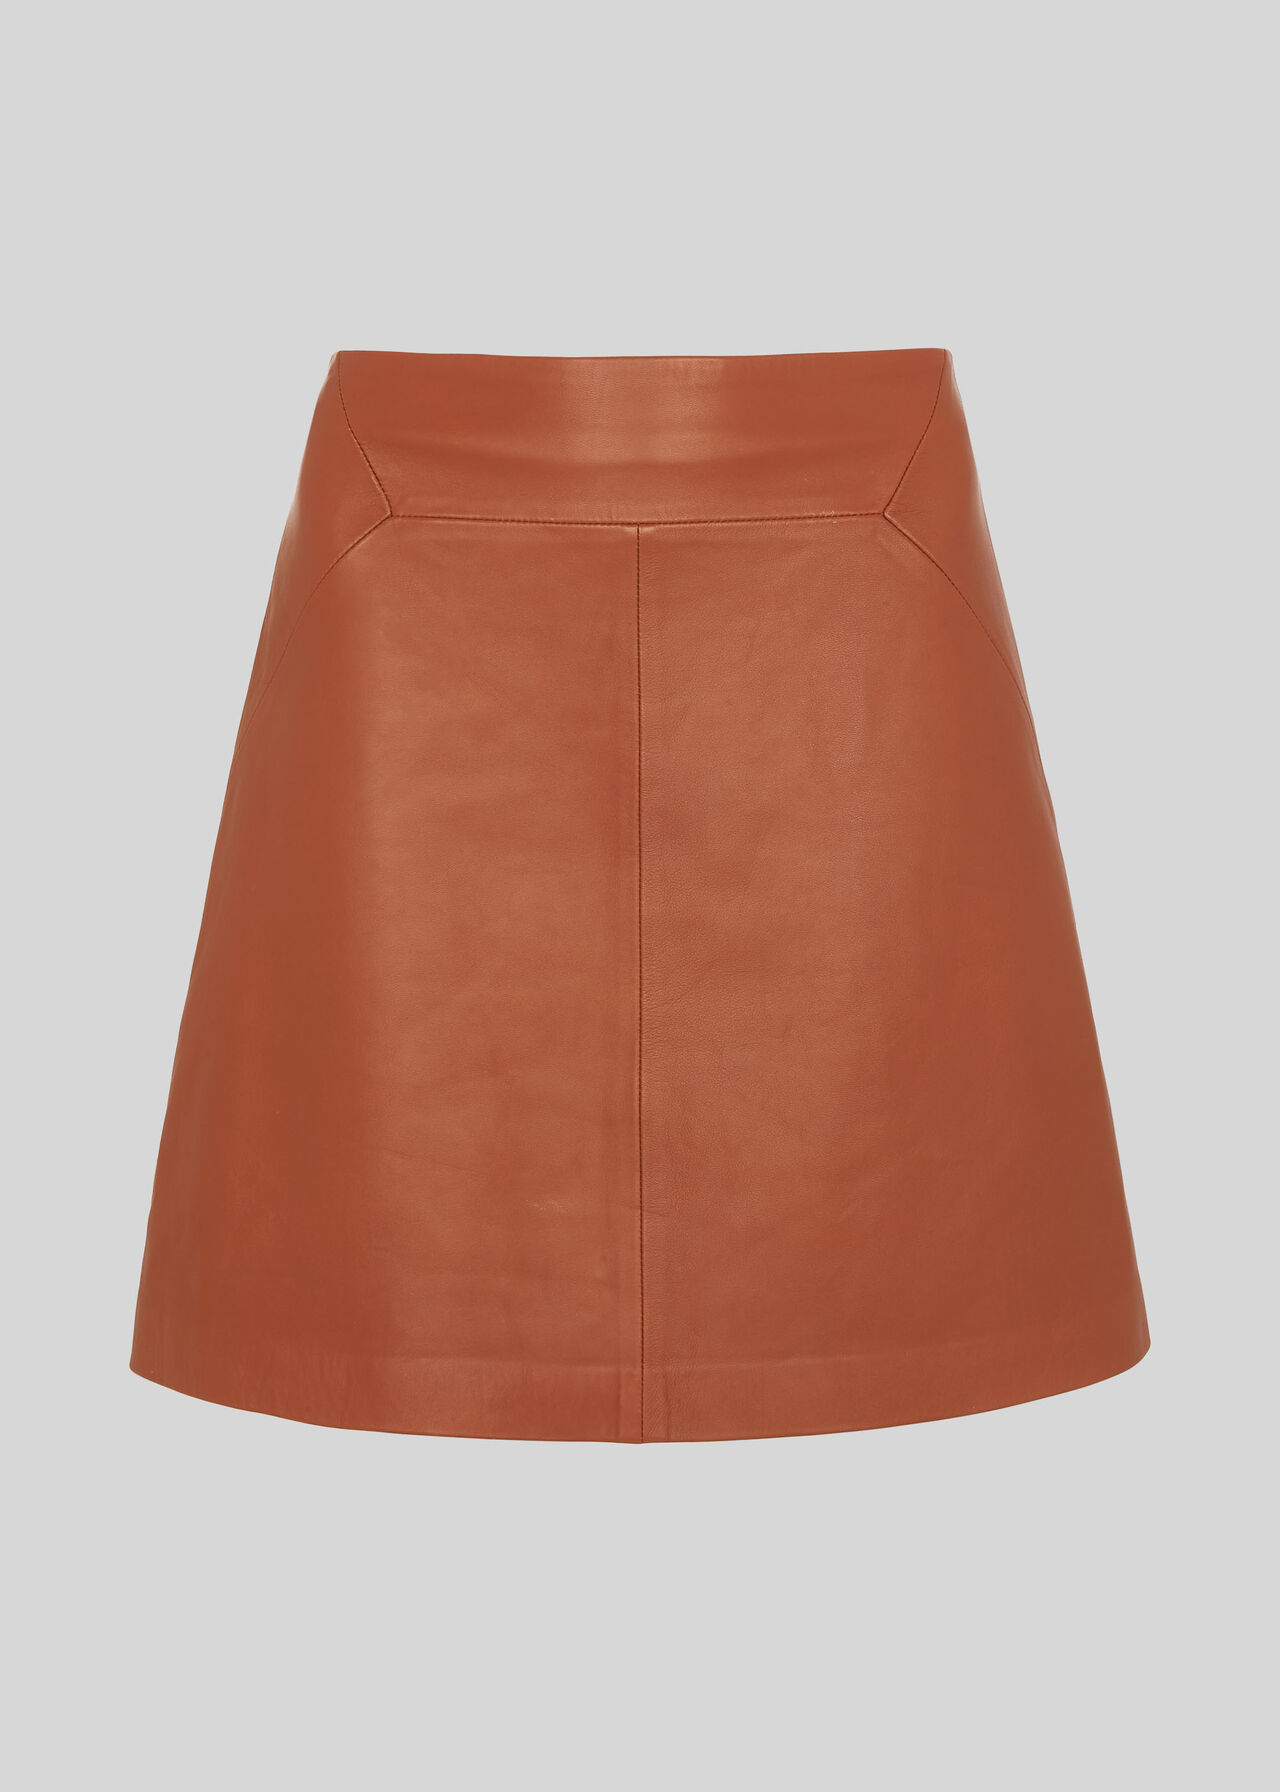 Rust Leather A Line Skirt | WHISTLES | Whistles